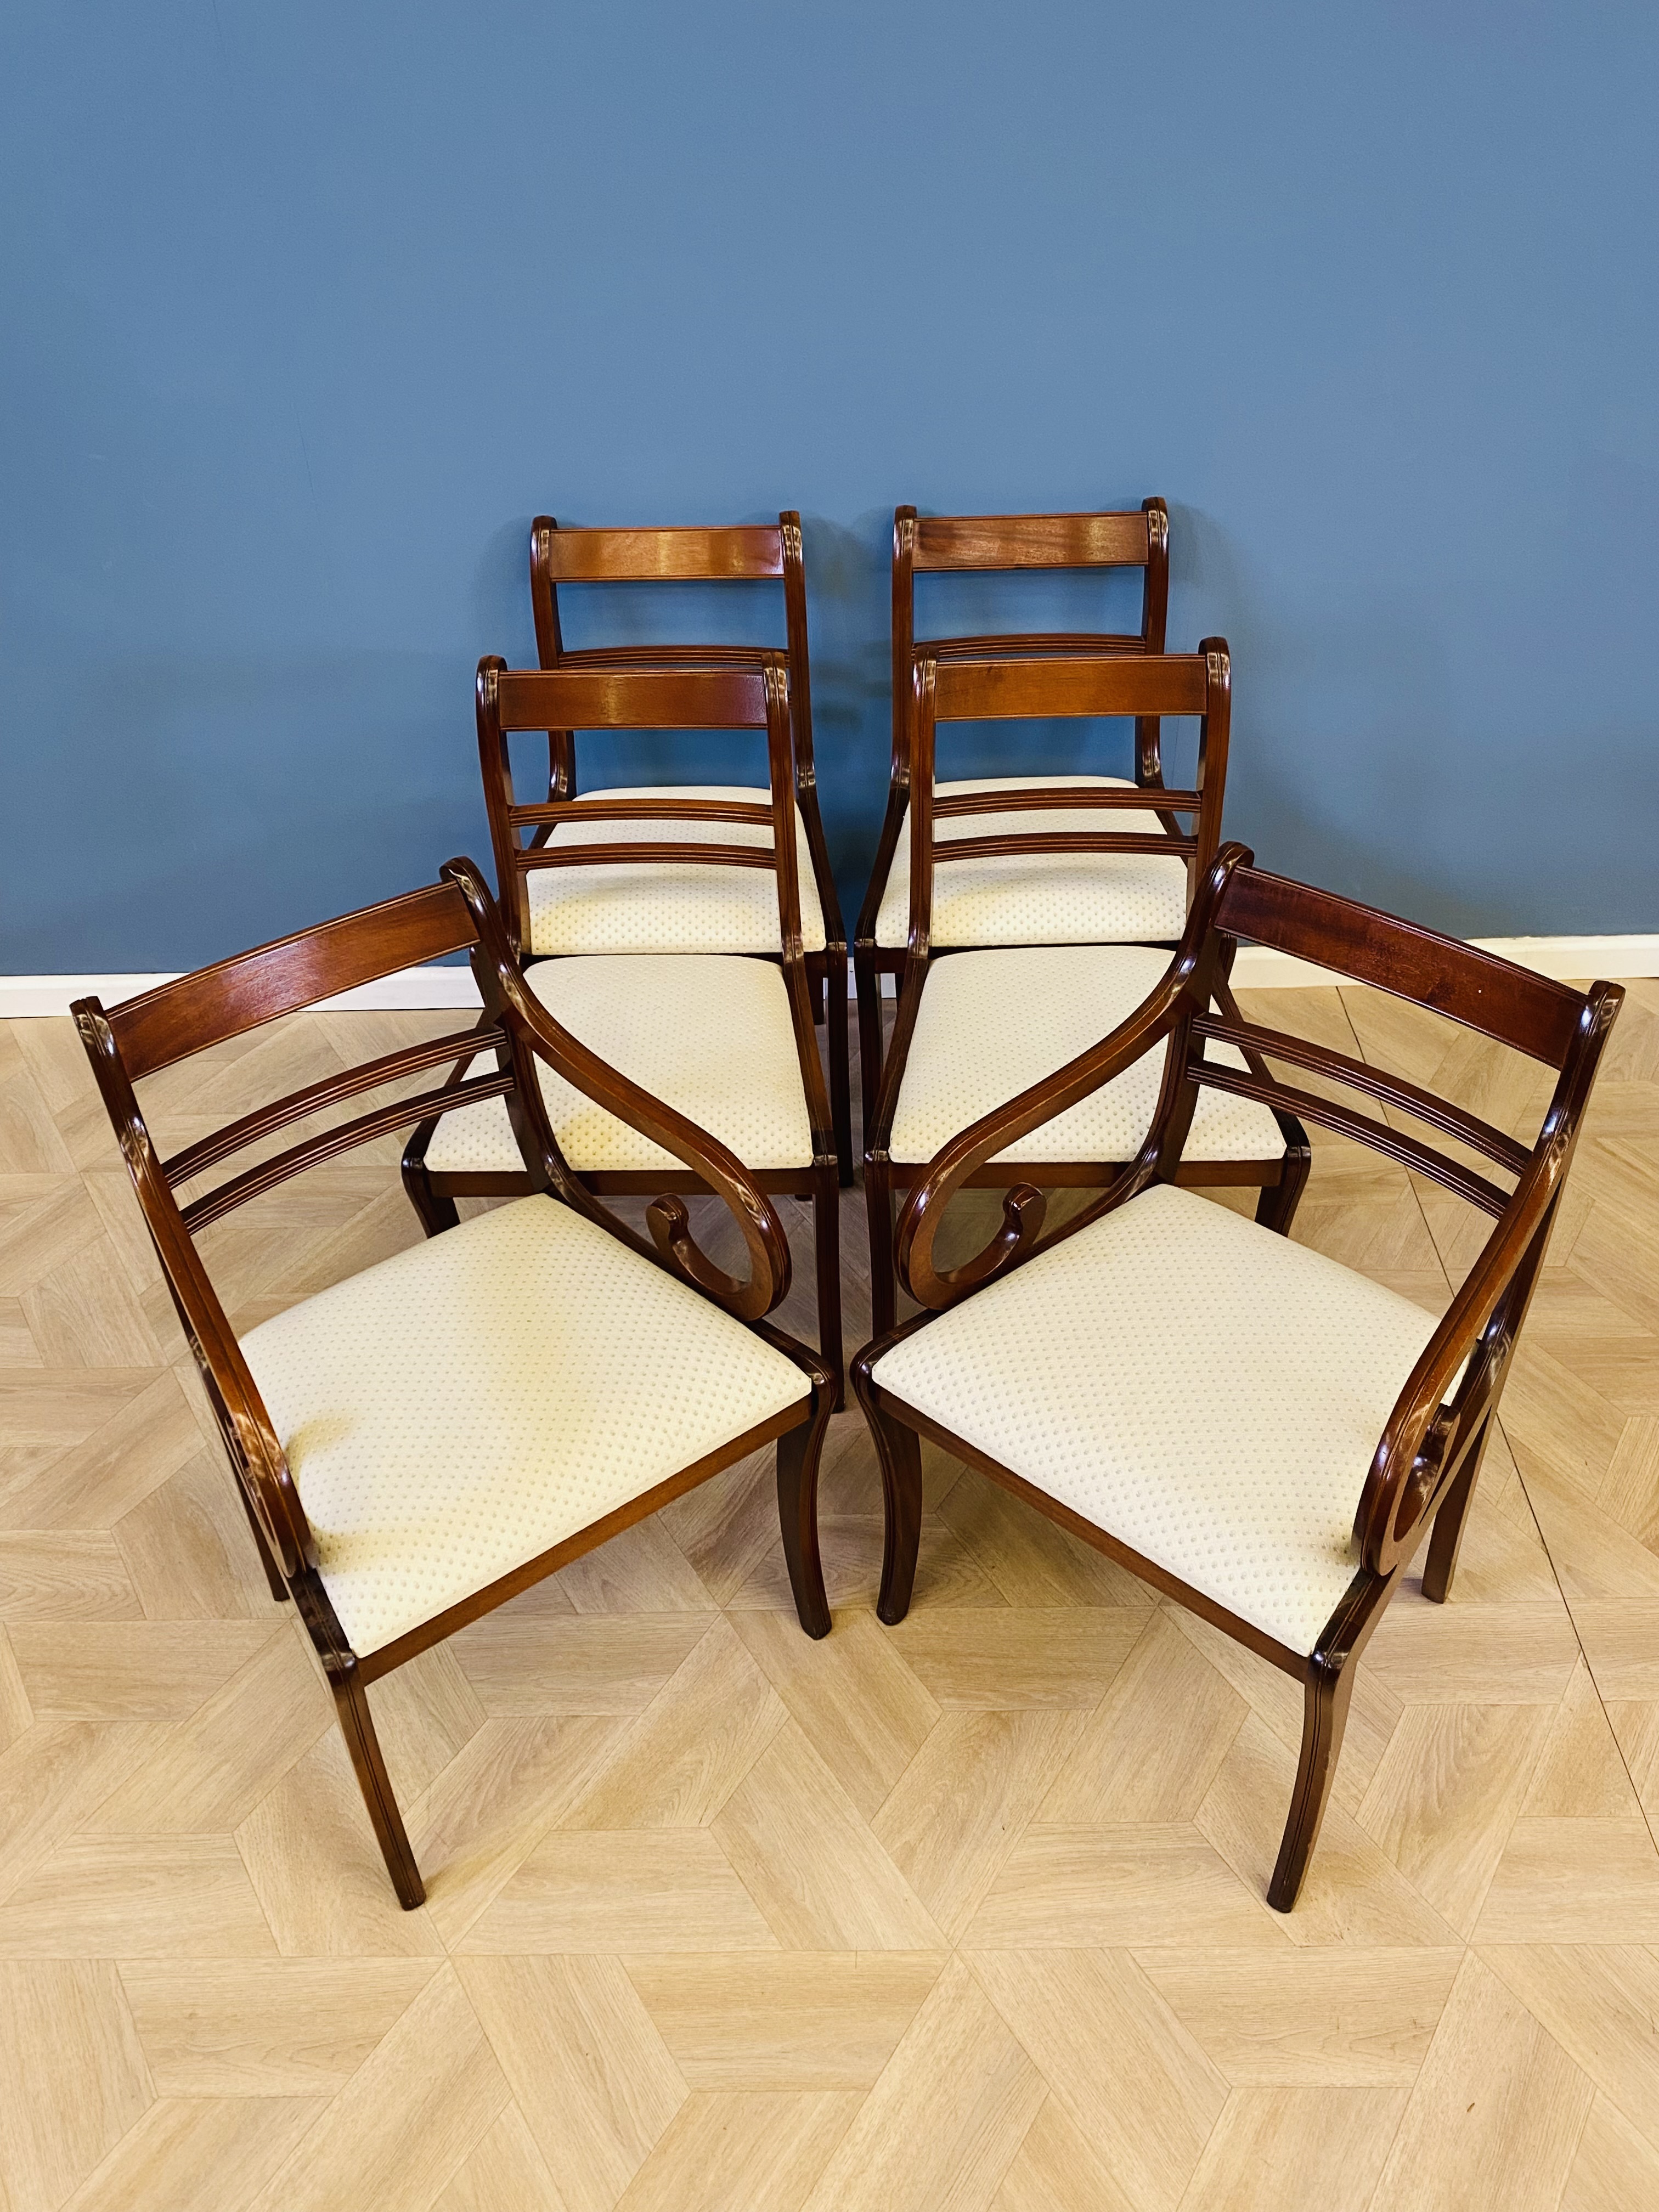 Set of six mahogany Regency style dining chairs - Image 2 of 7